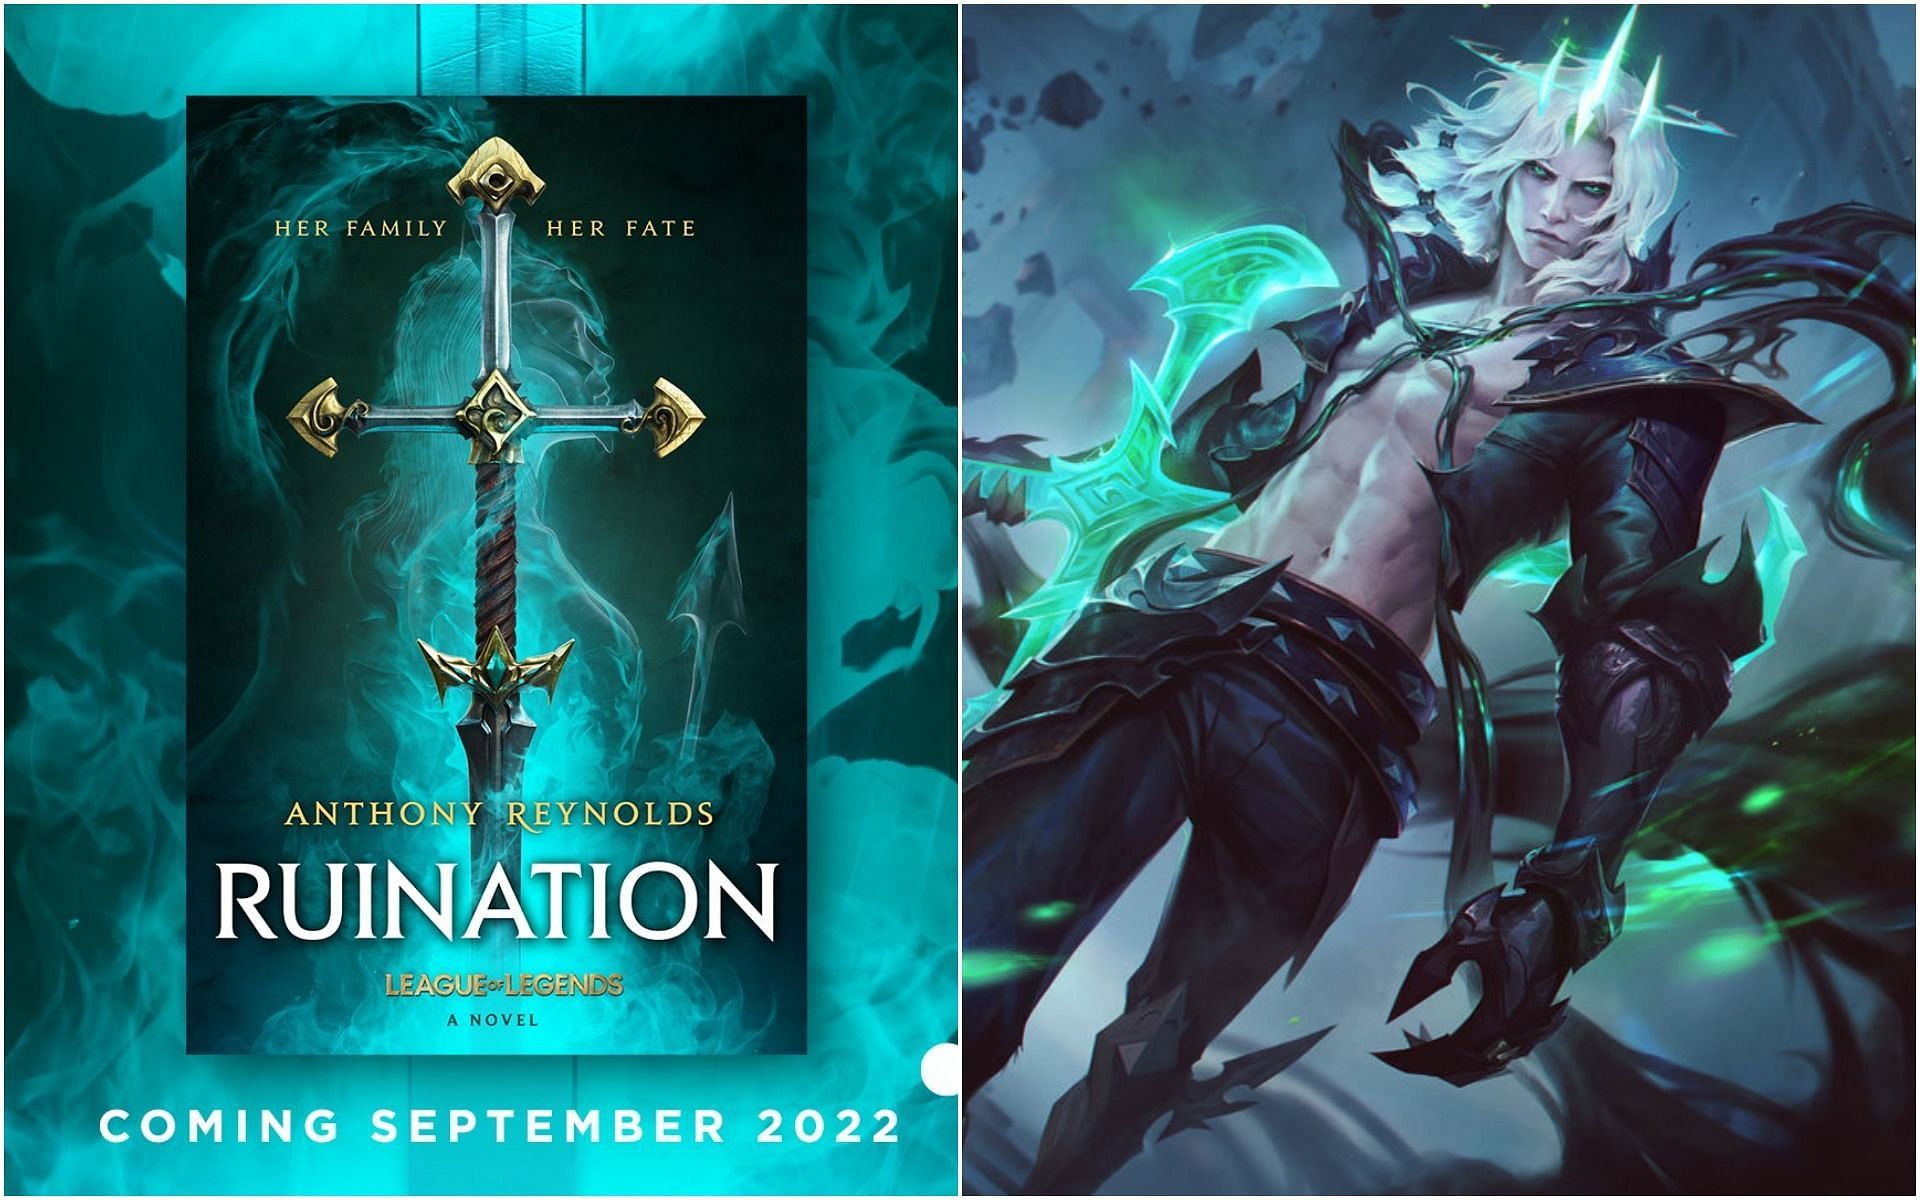 An untold story of Kalista and Viego will be revealed in Riot Games&#039; brand new novel Ruination (Image via Orbit Books/League of Legends)